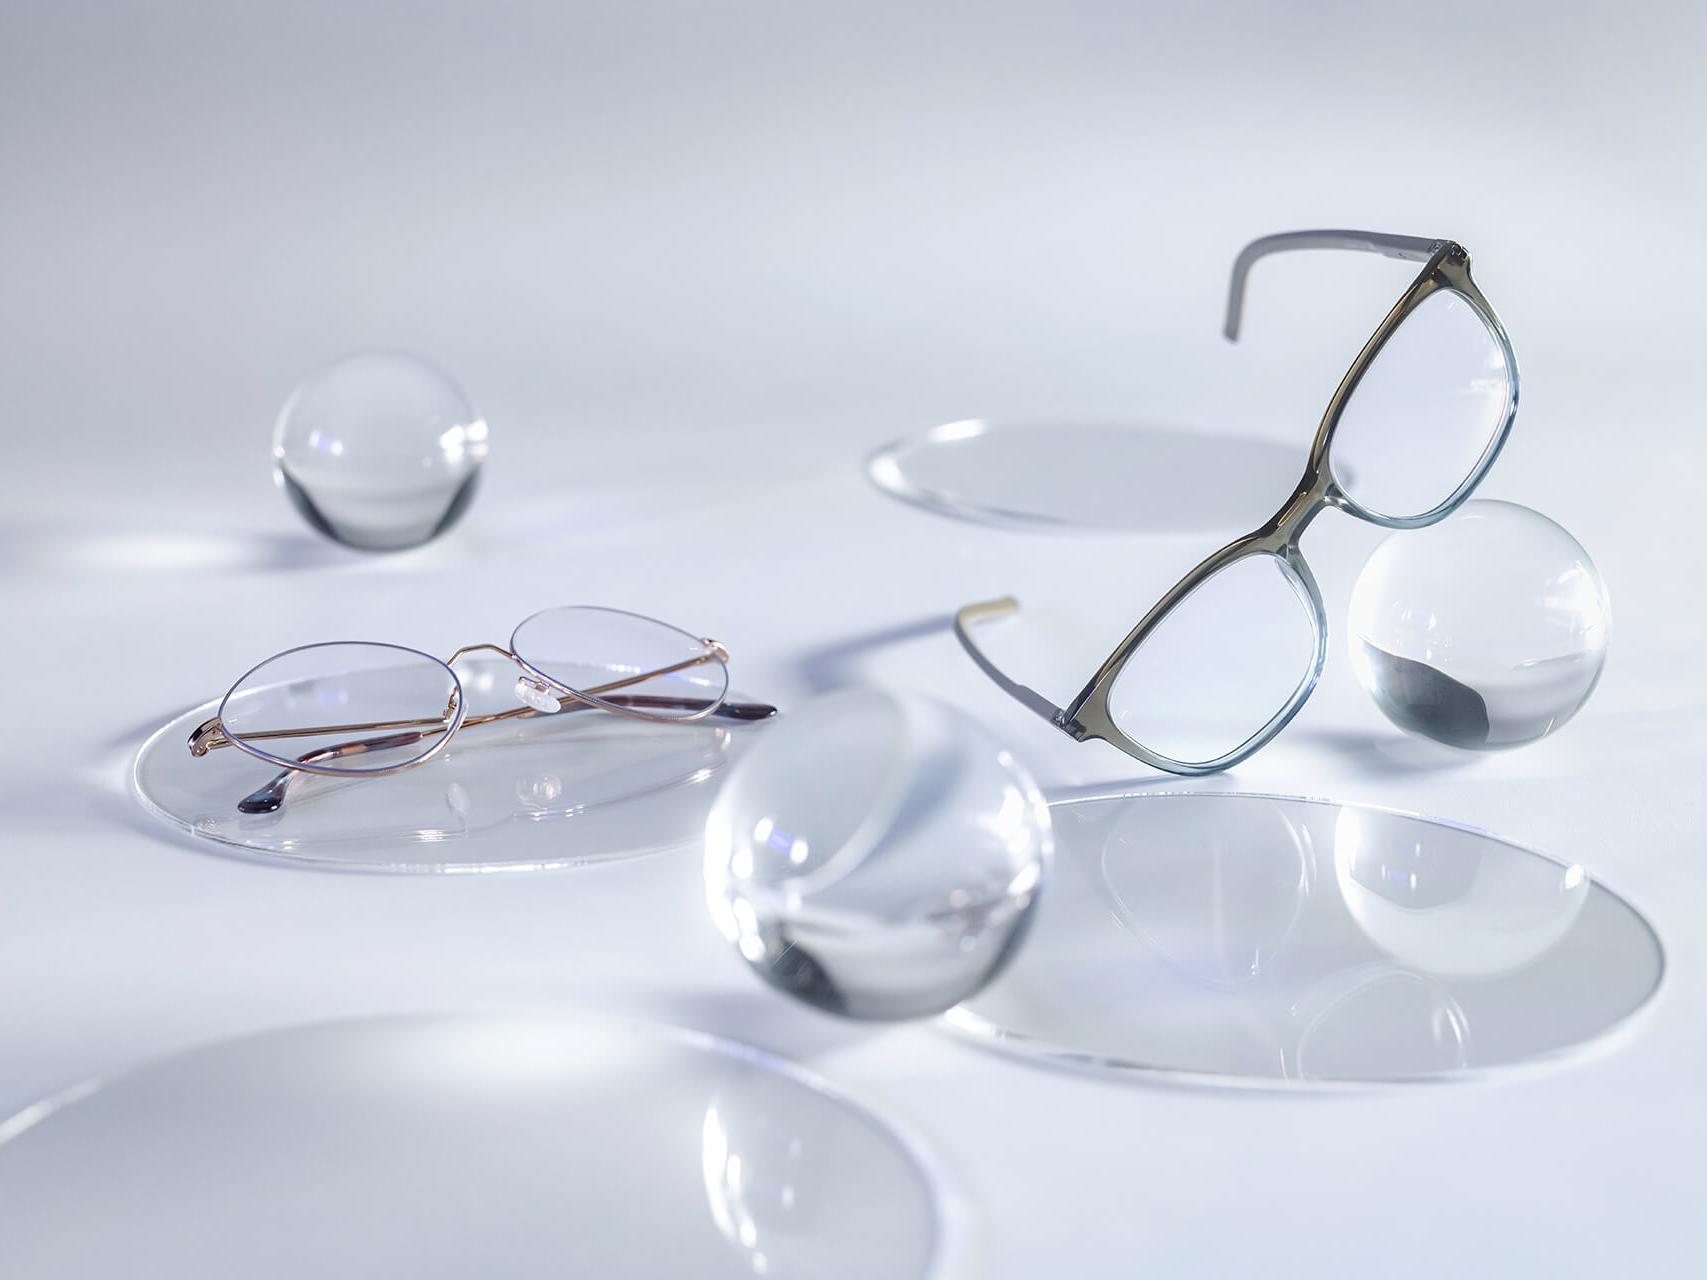 Glasses with ZEISS lenses that have the DuraVision® Silver coating and show no reflections compared to the surrounding glass spheres.